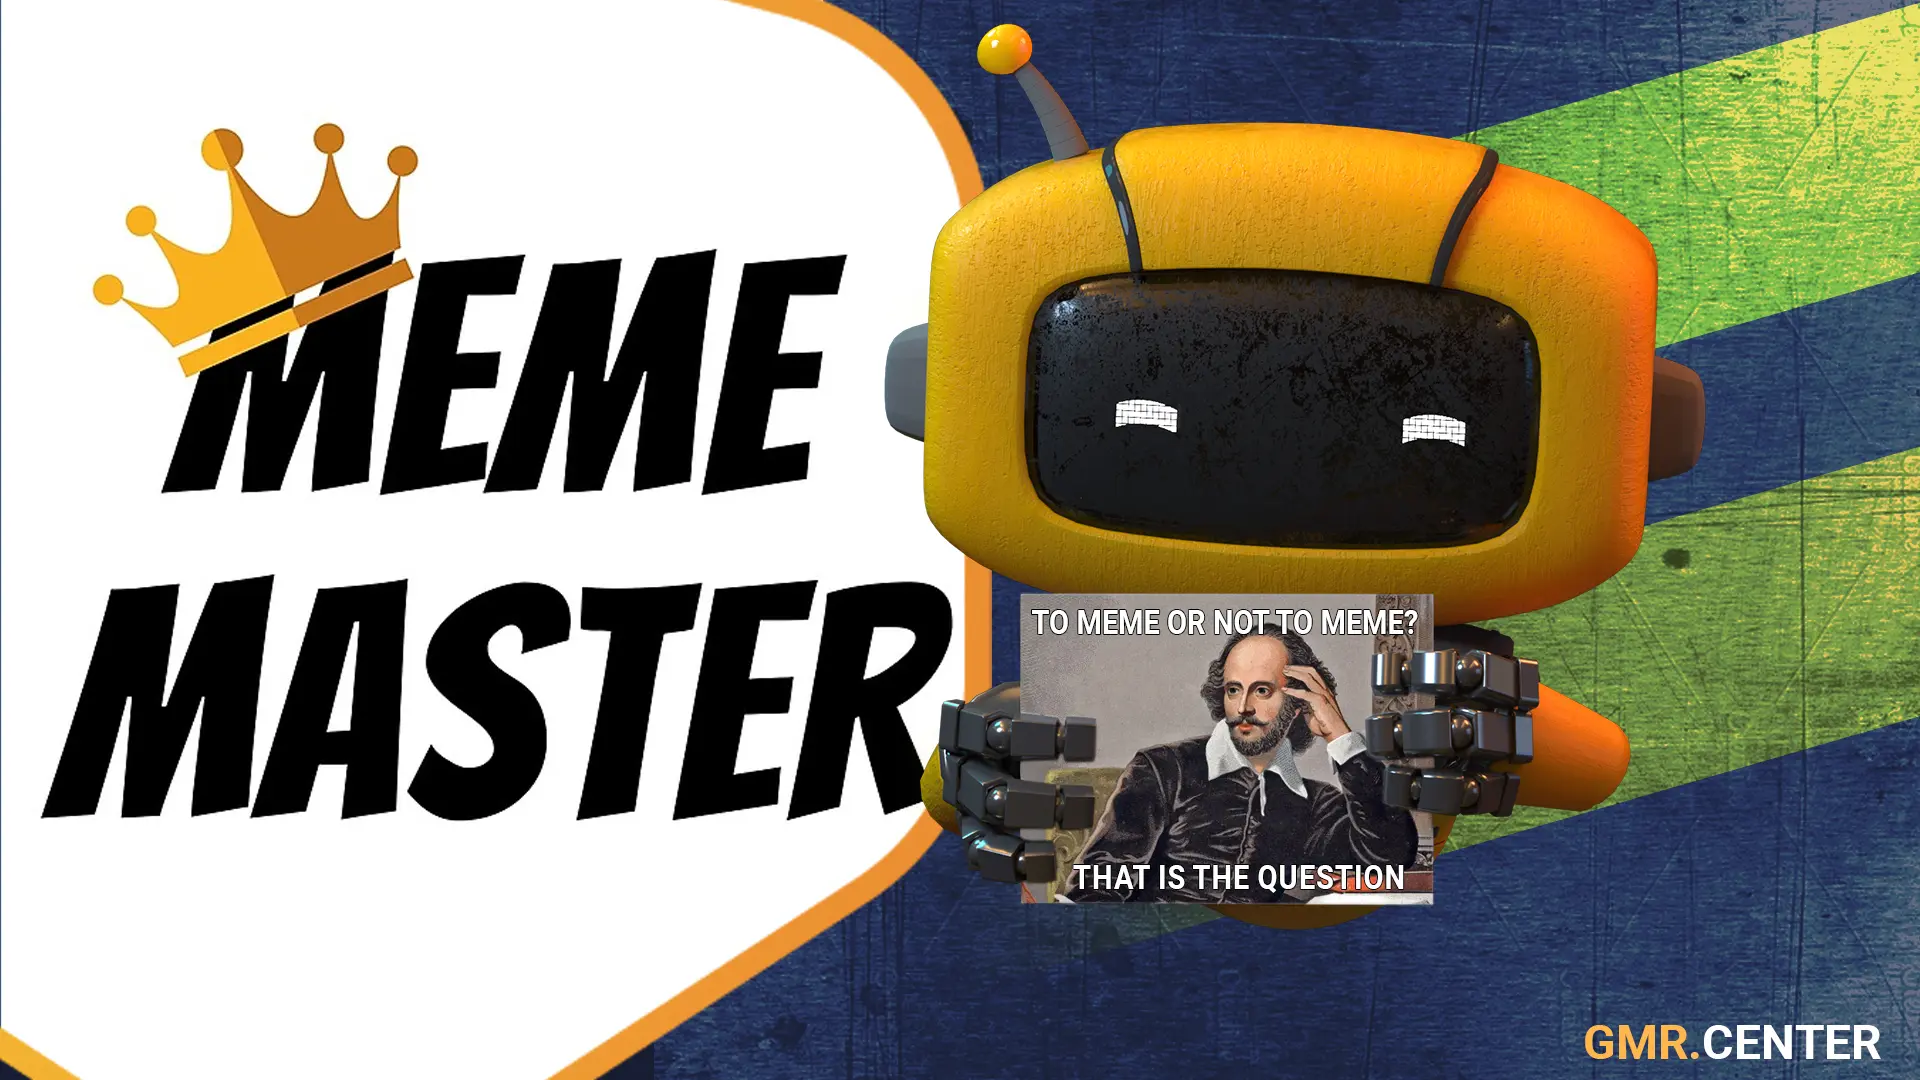 Are you a true MEME Master? Showcase your skill and fight for the top spot!